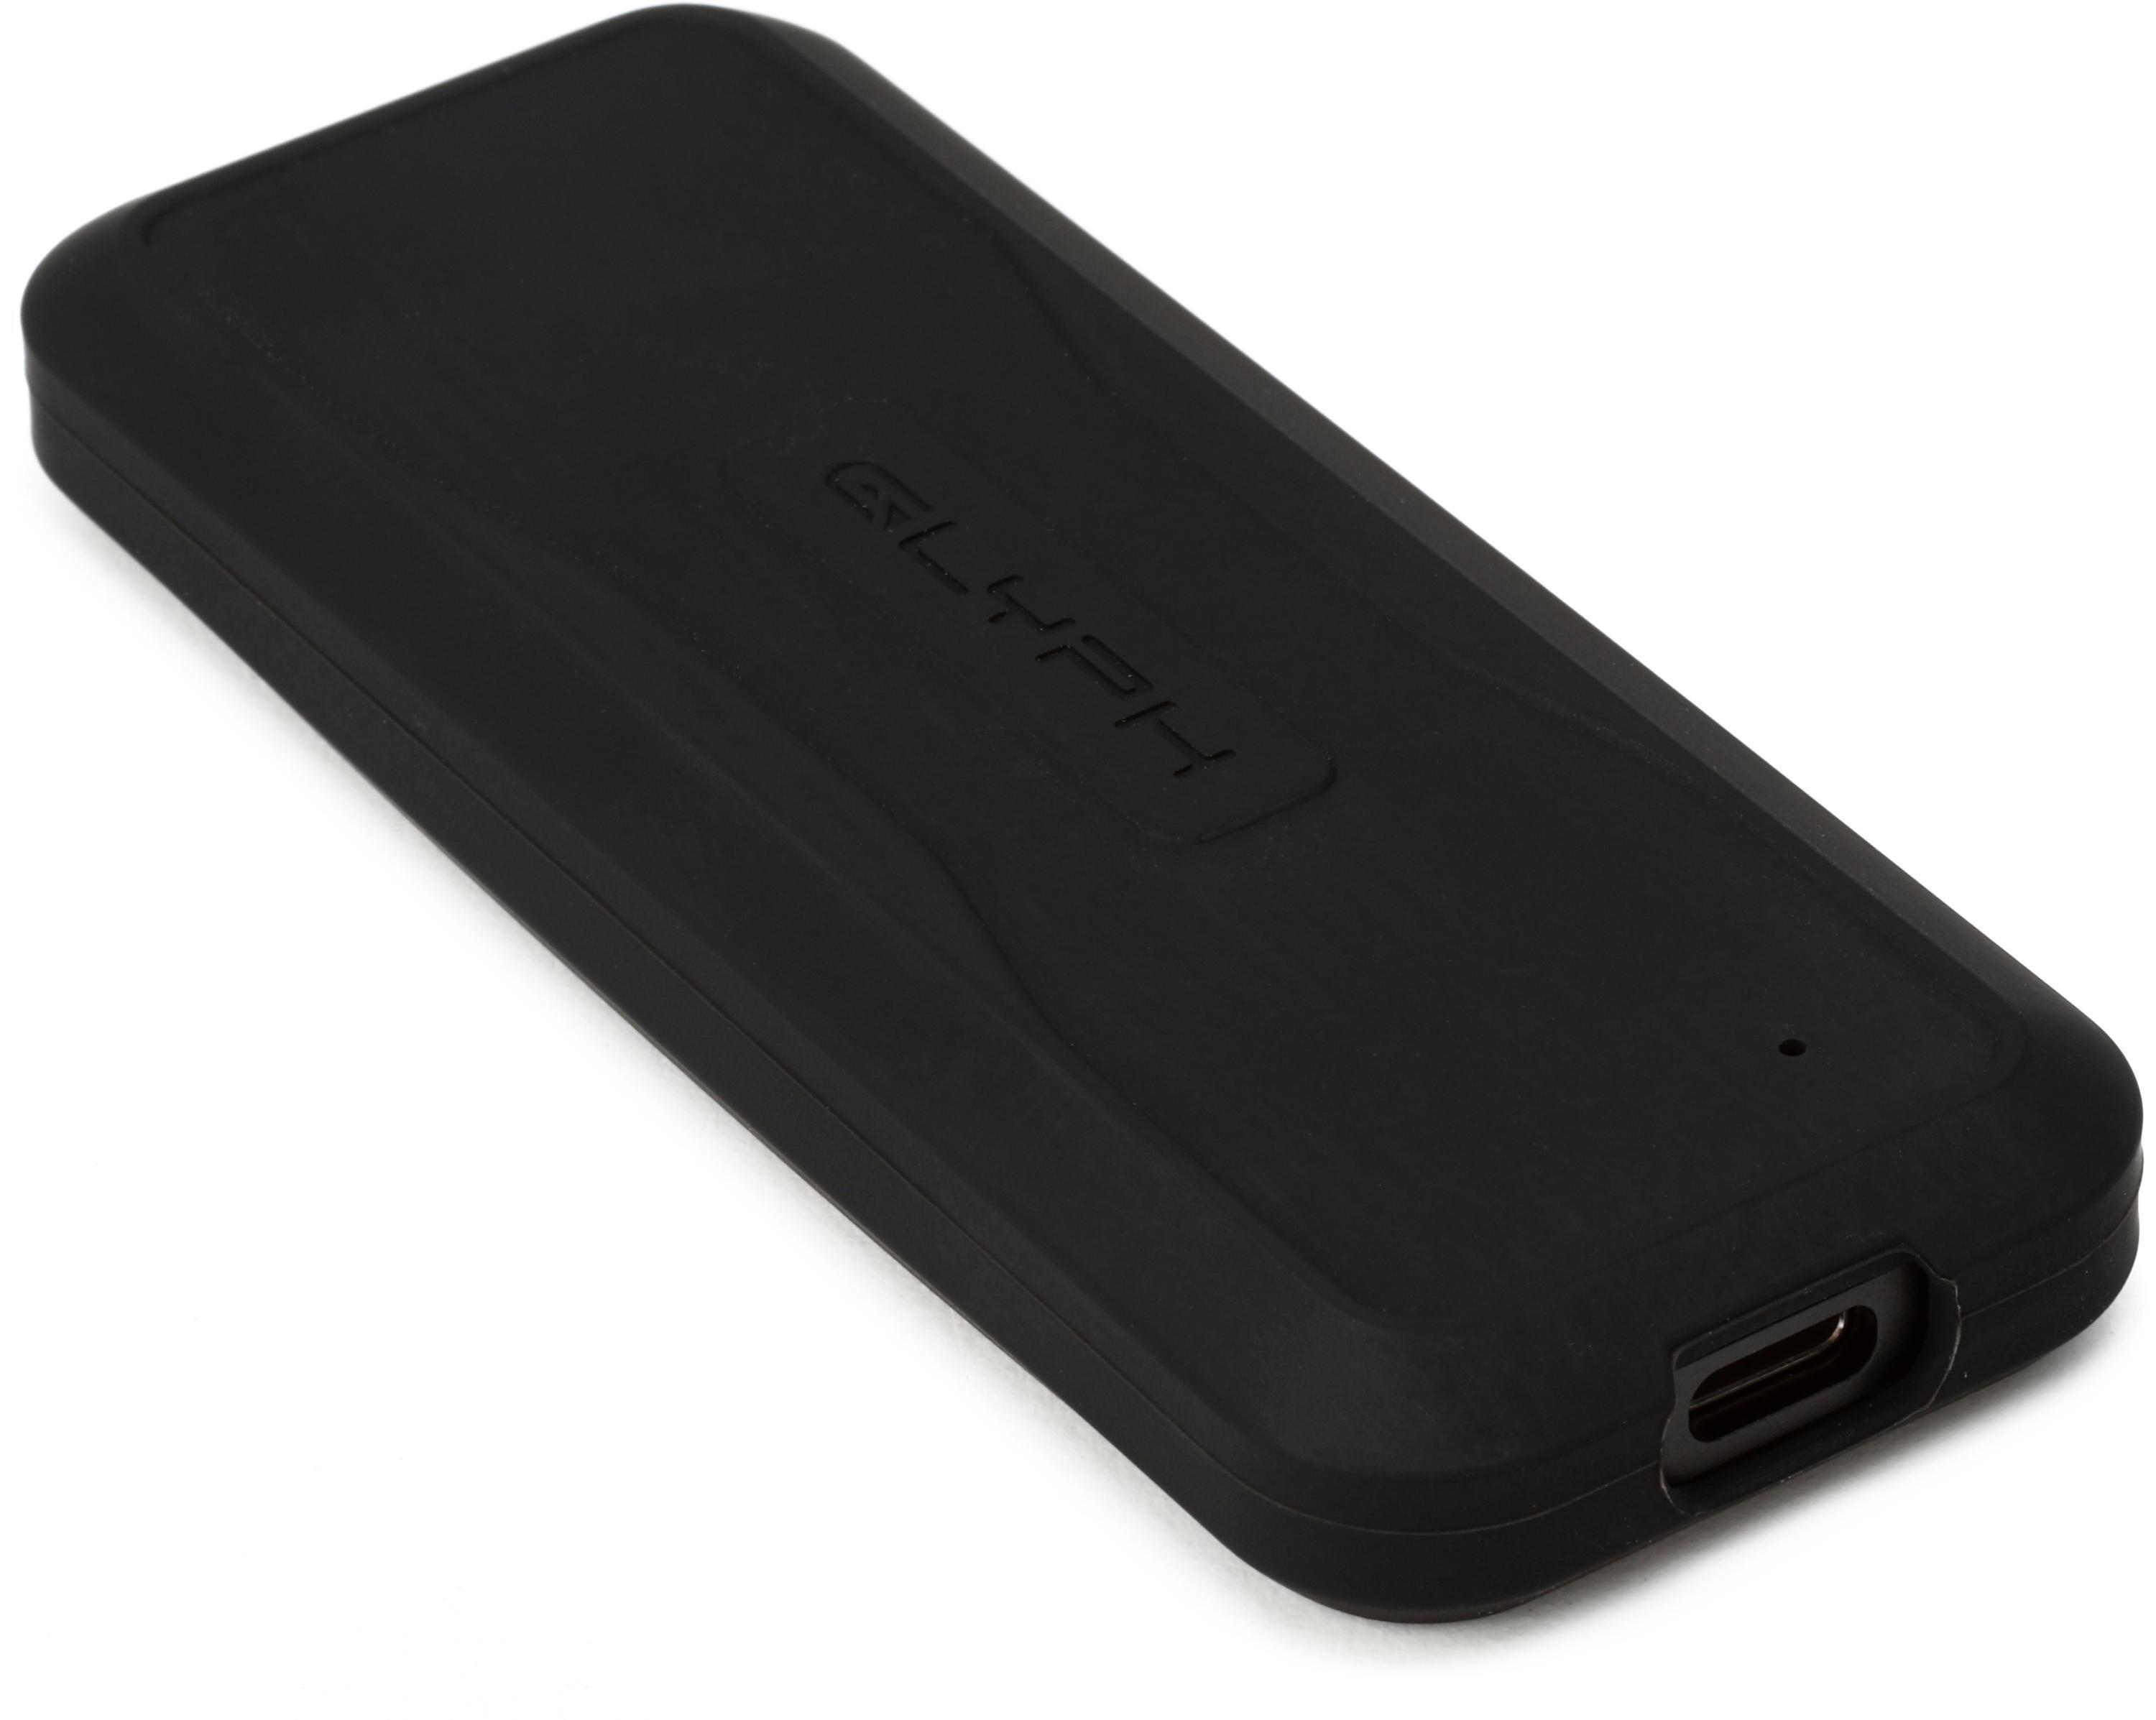 Glyph Atom EV SSD 500GB USB-C Portable Solid State Drive | Sweetwater